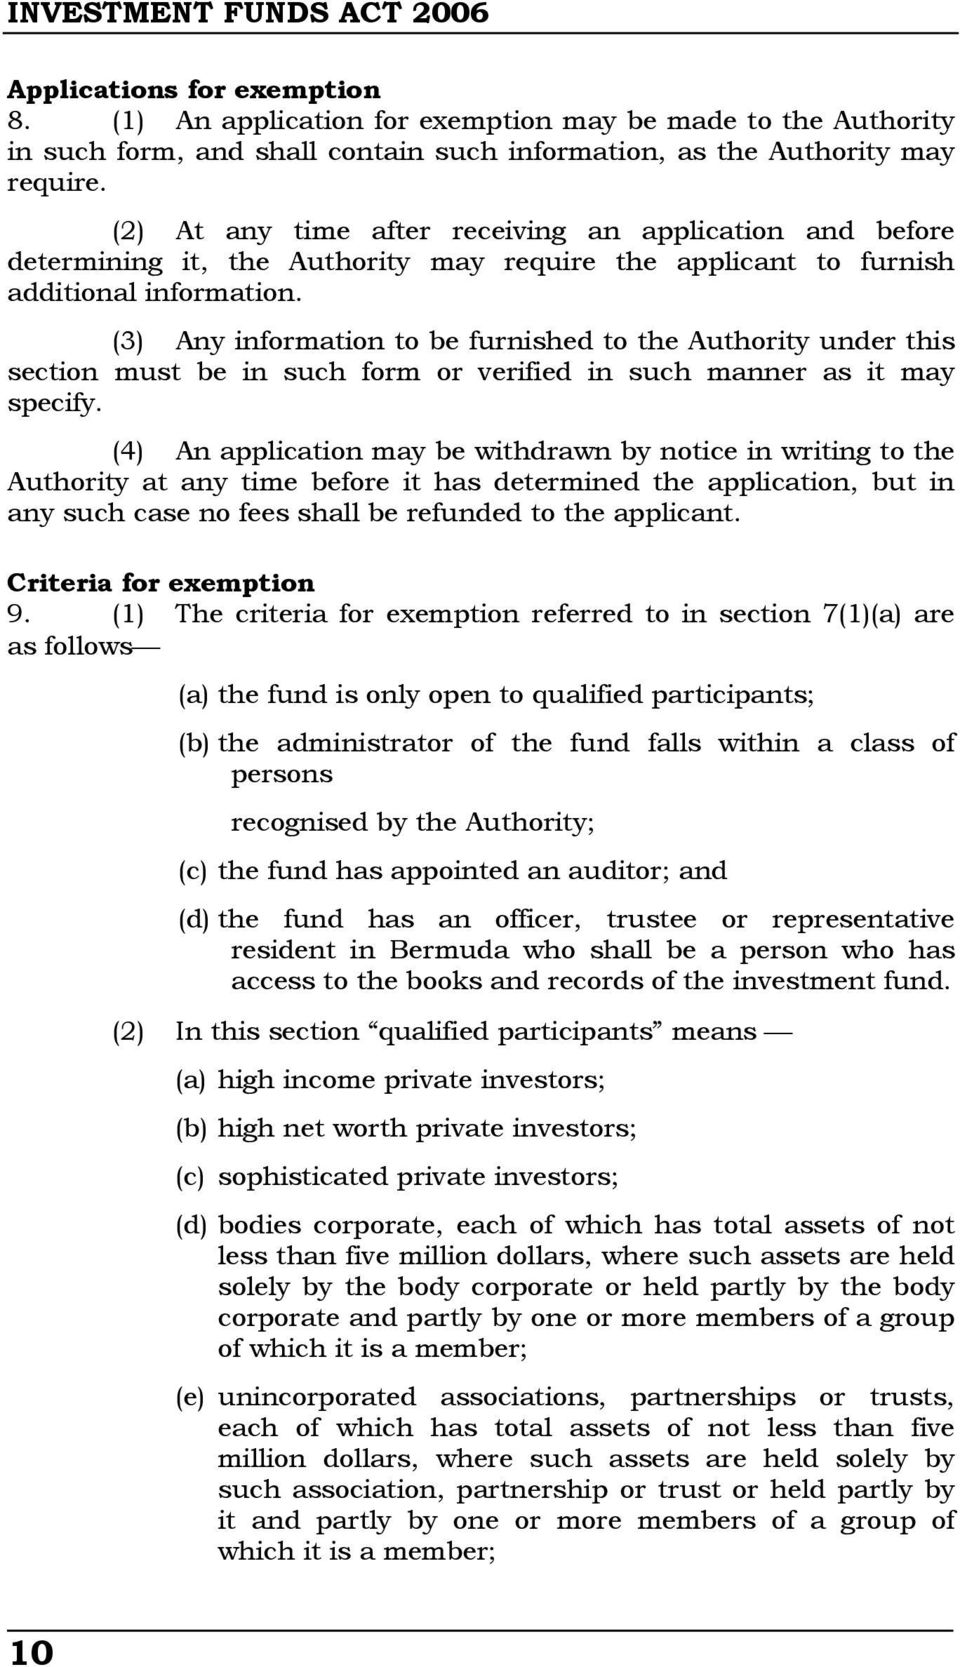 (3) Any information to be furnished to the Authority under this section must be in such form or verified in such manner as it may specify.